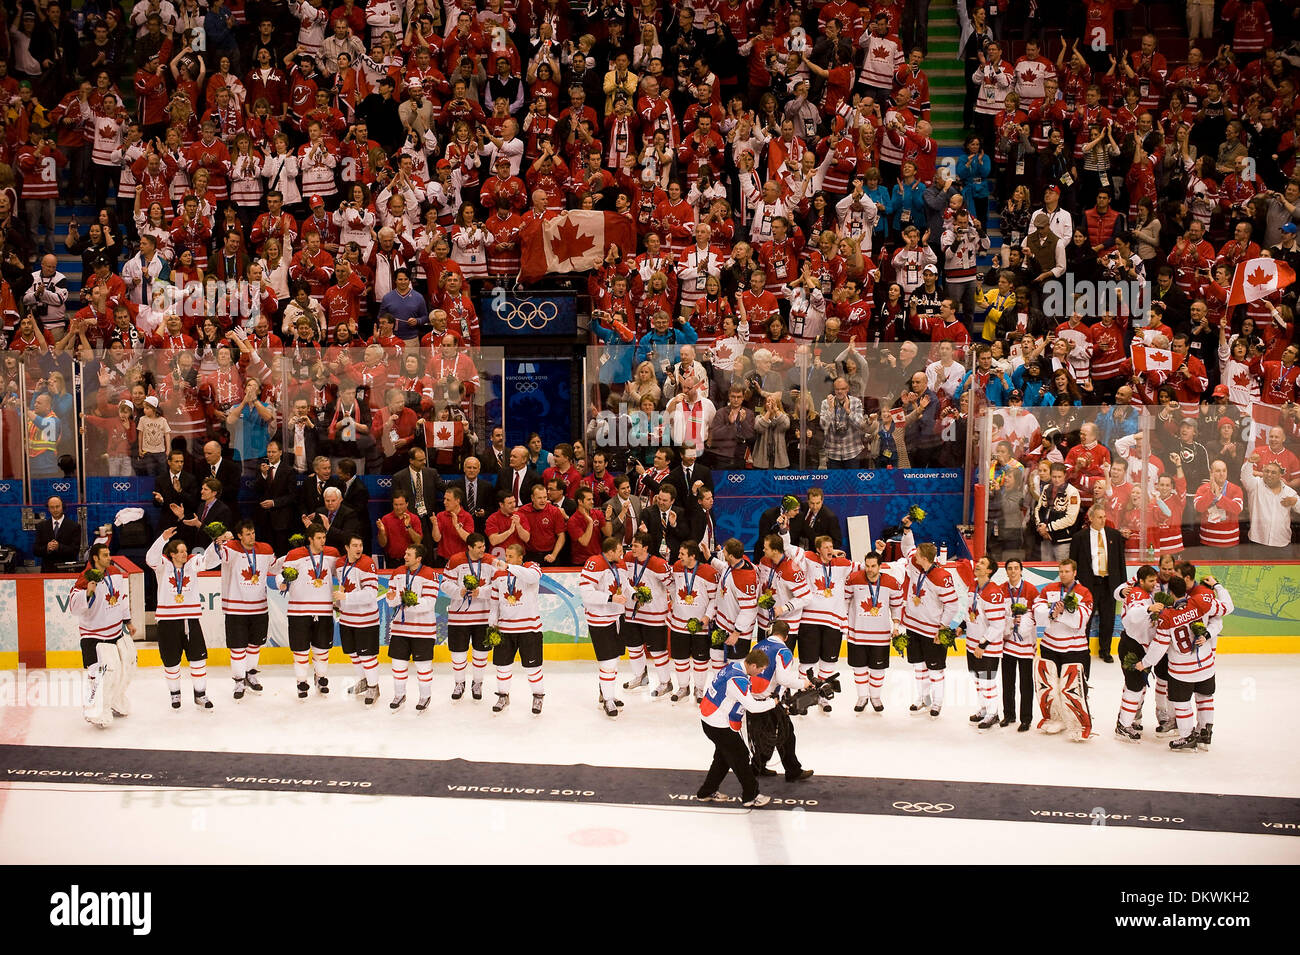 Feb. 27, 2010 - Vancouver, British Columbia, Canada - Olympics Men's Hockey  - Canada's Hockey team poses on center ice for a group photo after winning  the gold in Men's Gold Medal